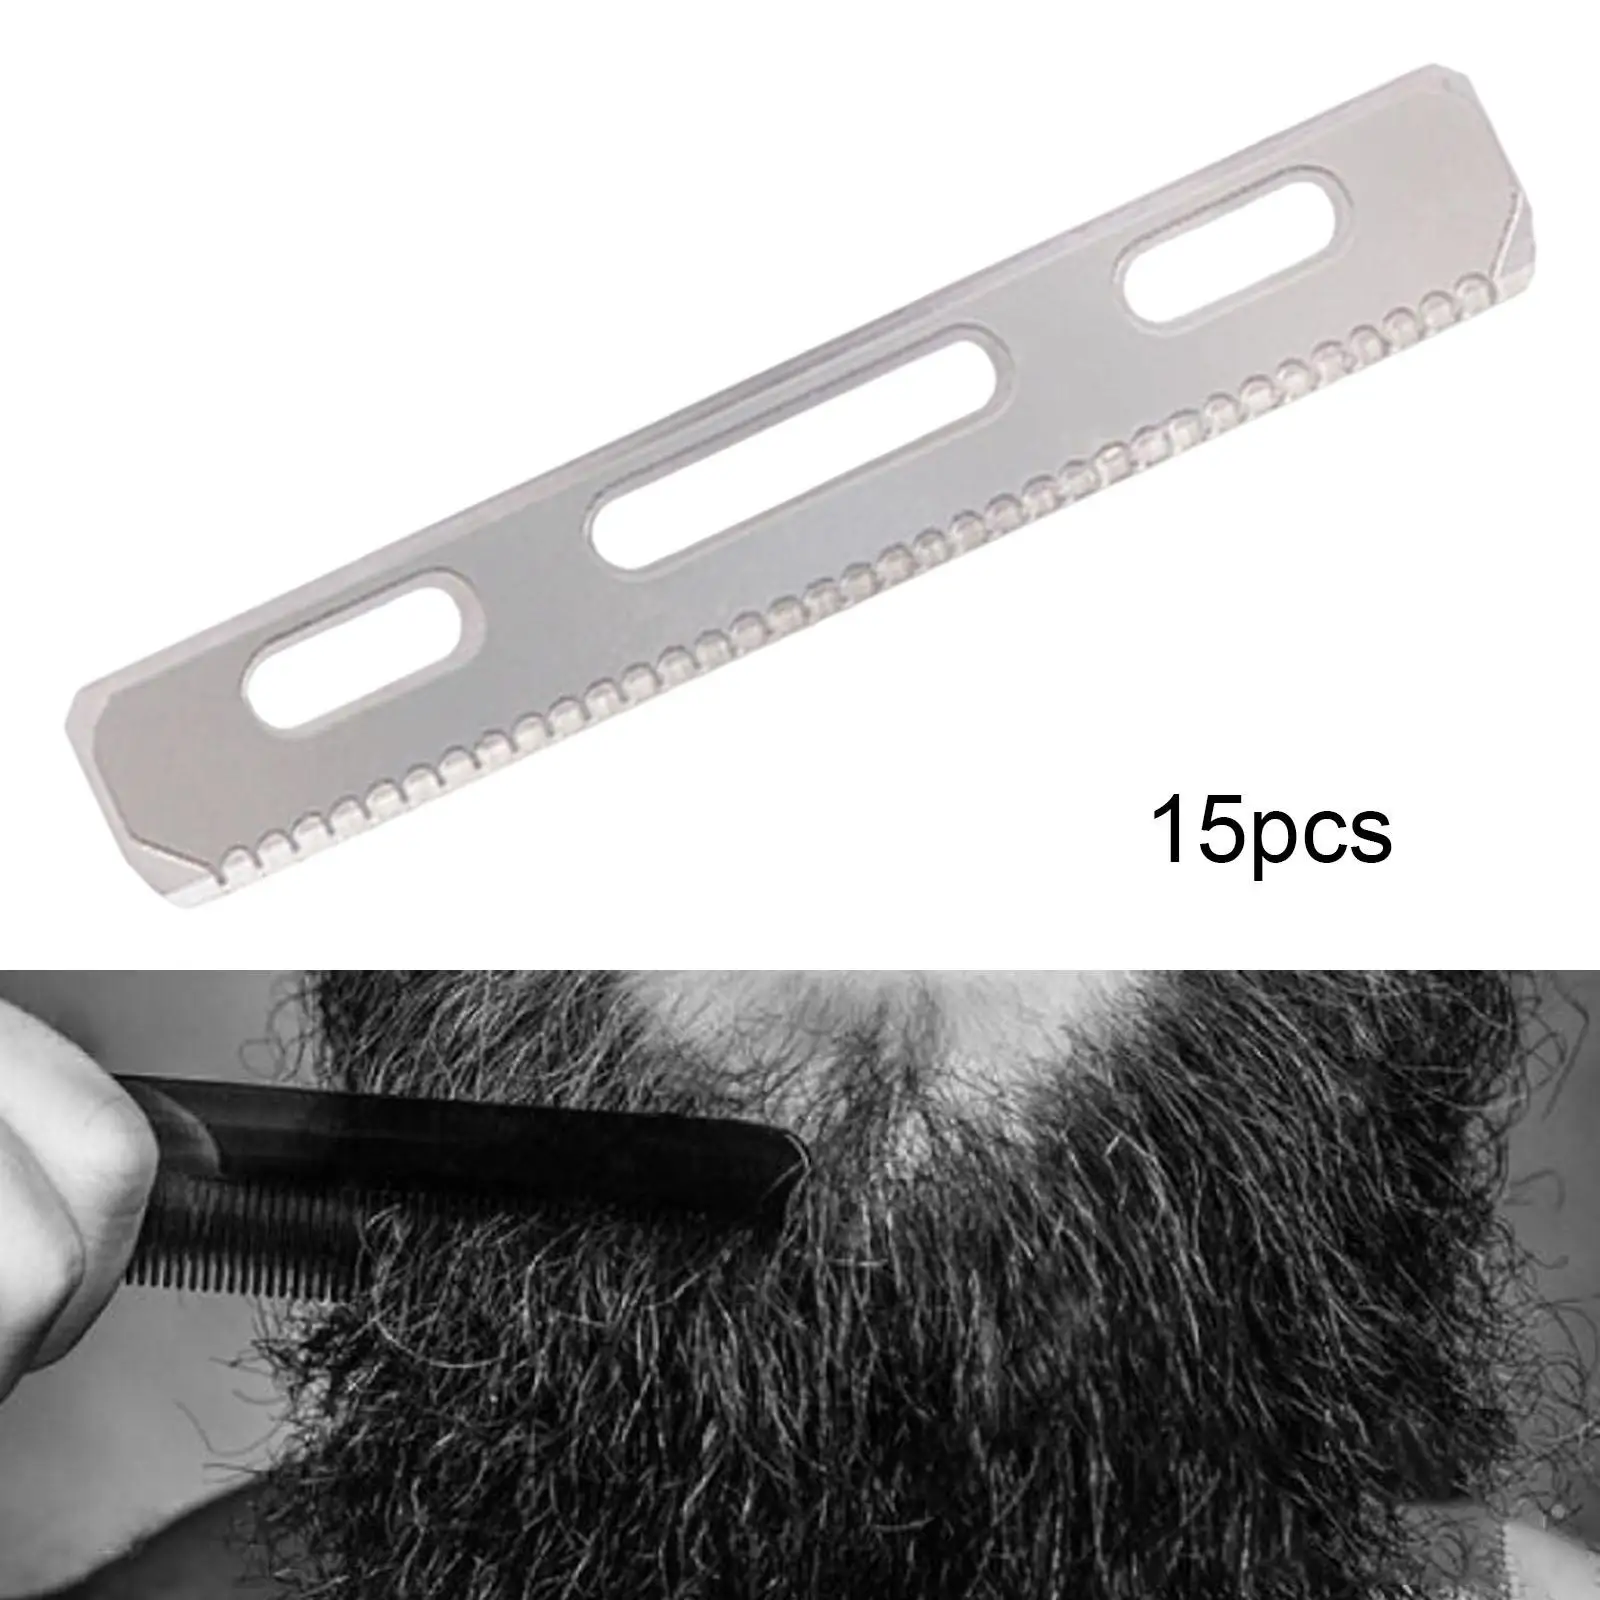 Eyebrow Trimmer Scraper Stainless Steel Eyebrow Hair Removers with Cover Facial Eyebrow Shaping Shaver Knife for Women Men